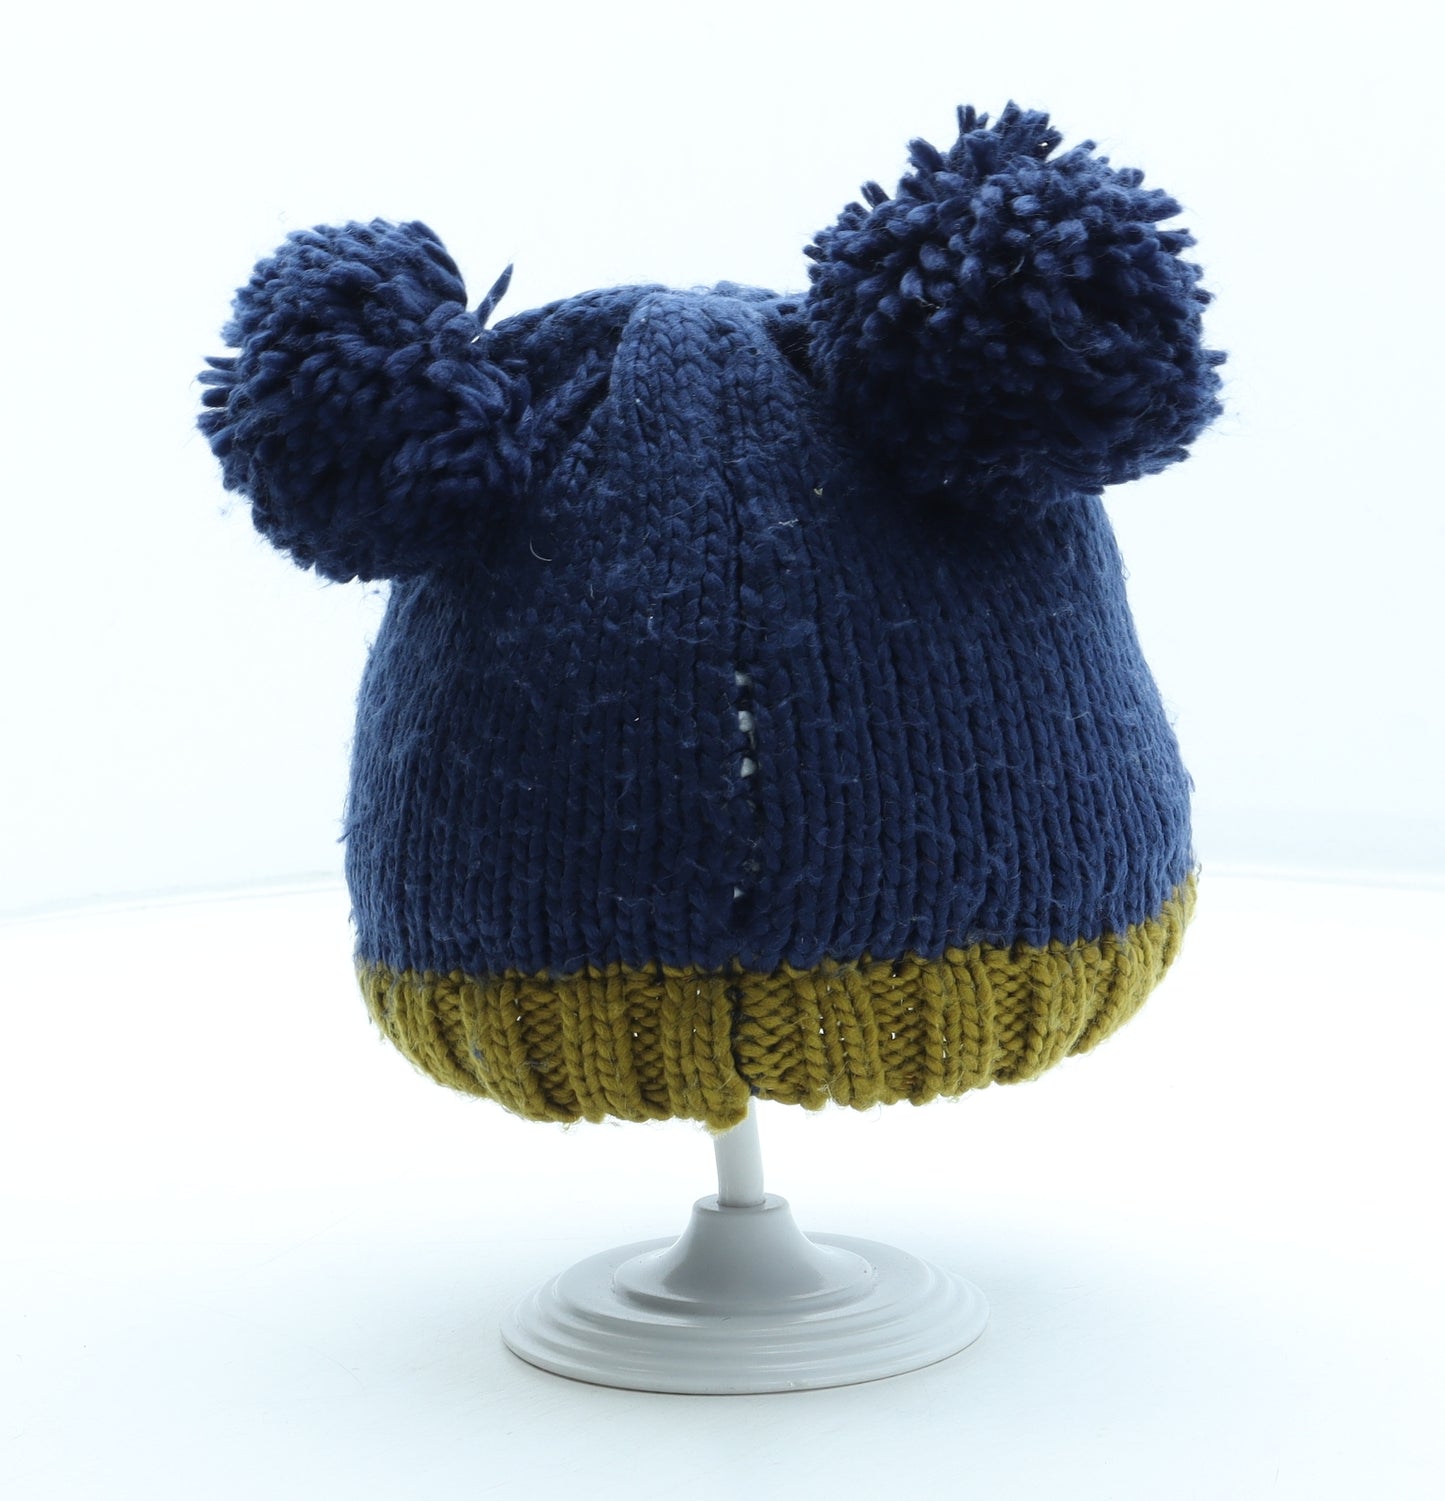 Marks and Spencer Boys Blue Colourblock Acrylic Bobble Hat Size S - Size 3-6 Years Bear Detail